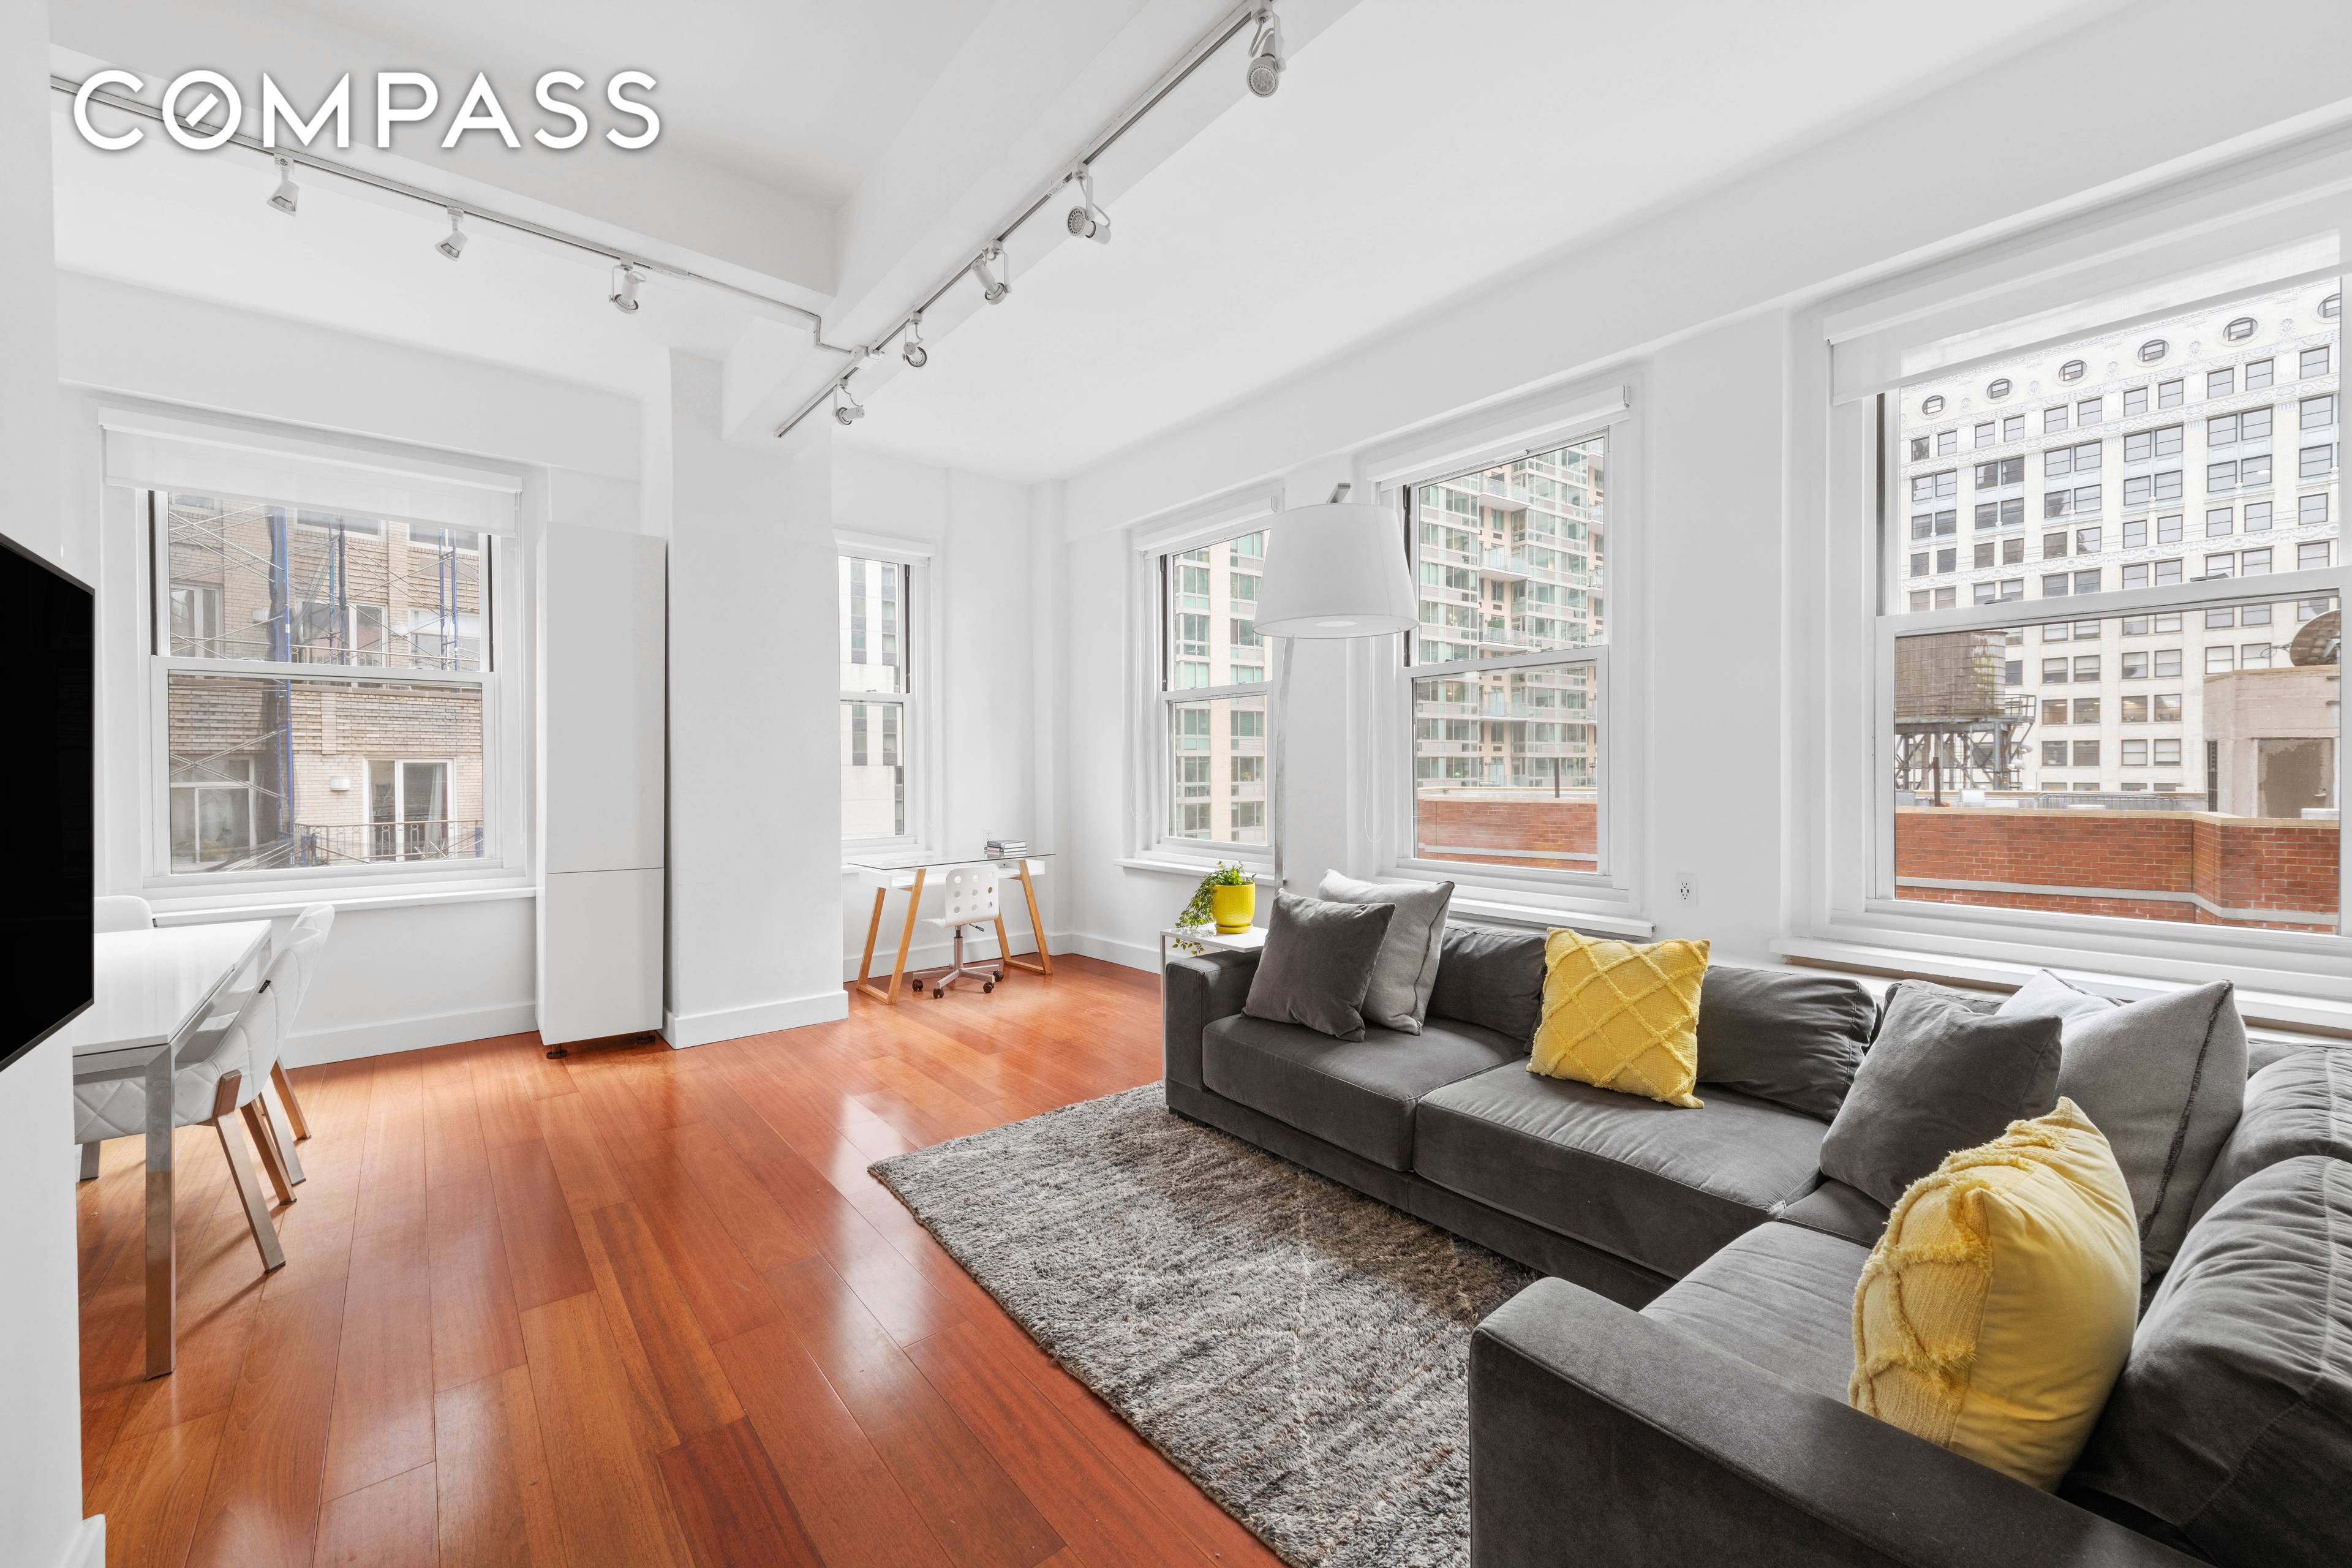 You'll want to move right into this sun splashed, high floor two bedroom, two bathroom corner residence at the South Star, an Art Deco FiDi Condominium.